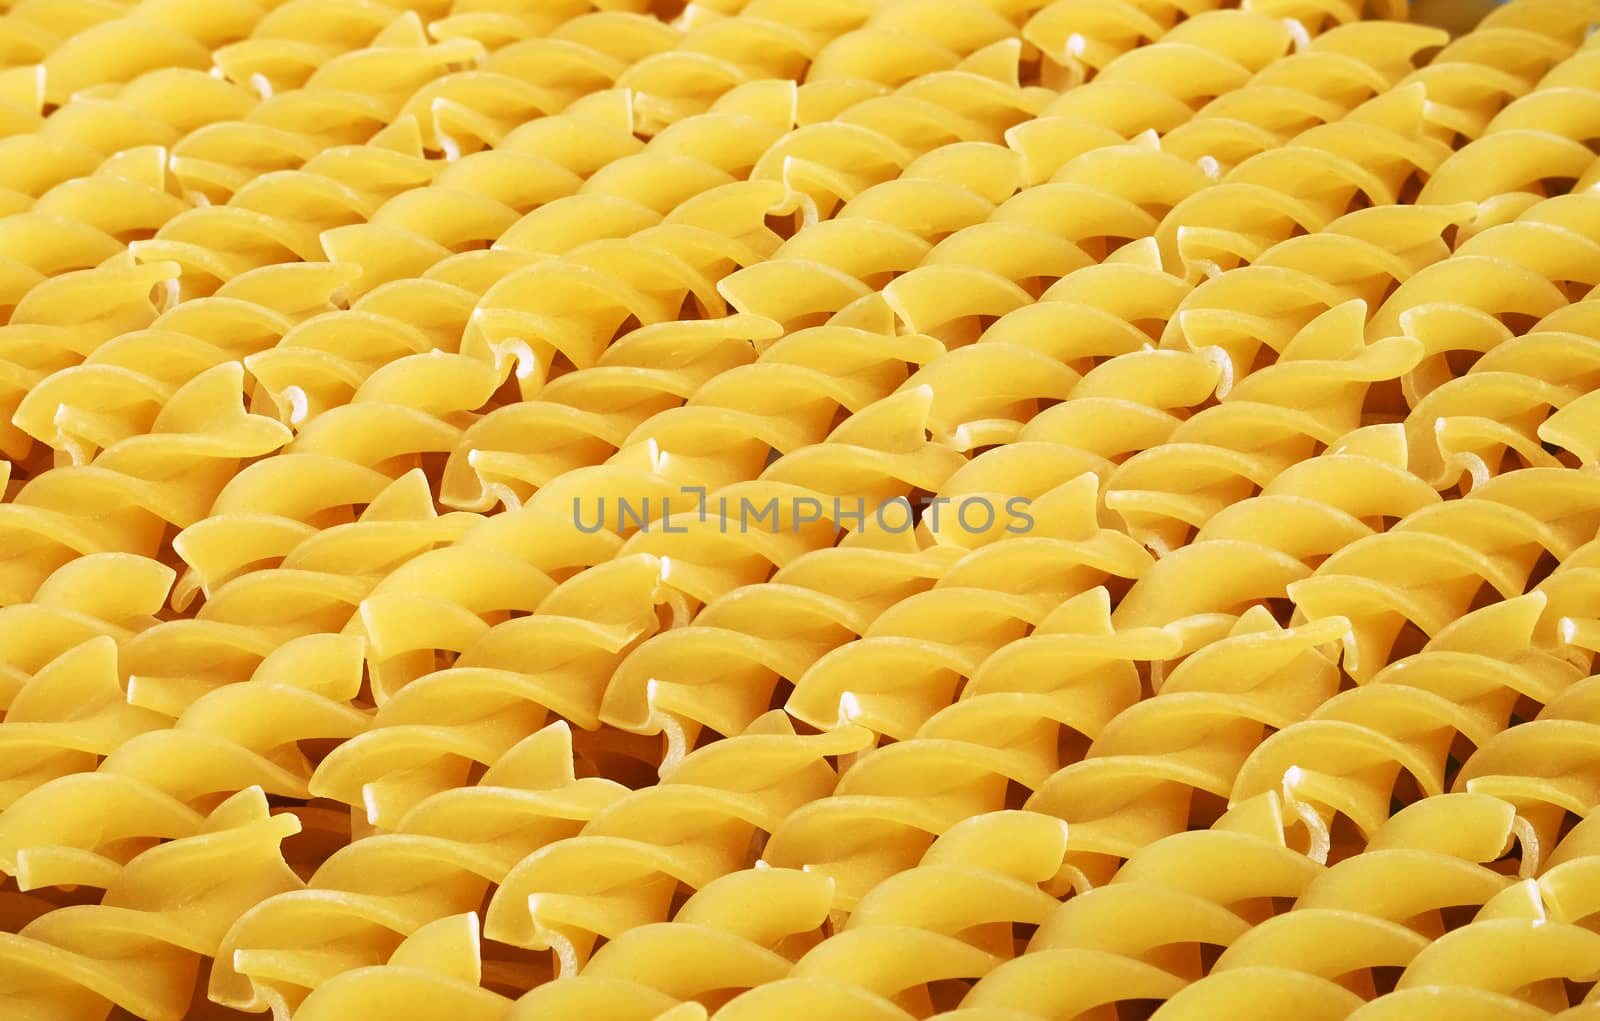 Italian yellow short uncooked fusilli pasta closeup sorted diagonally for background or texture.